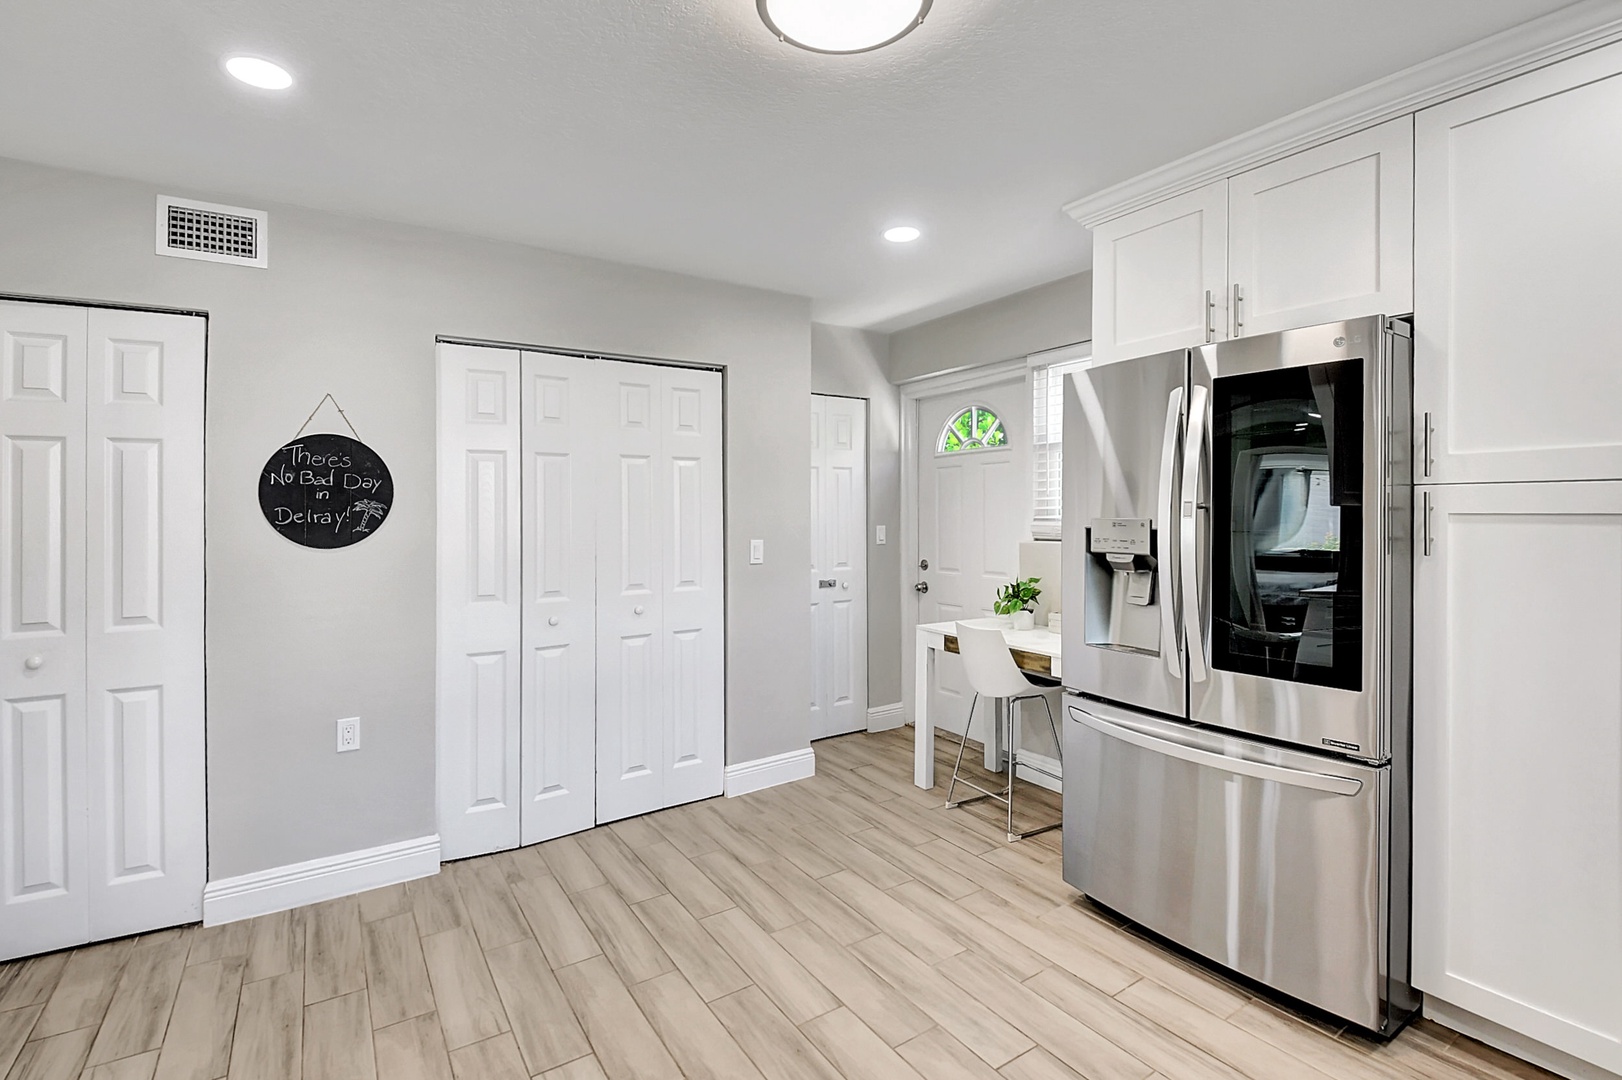 The fully updated kitchen is spacious & offers all the comforts of home